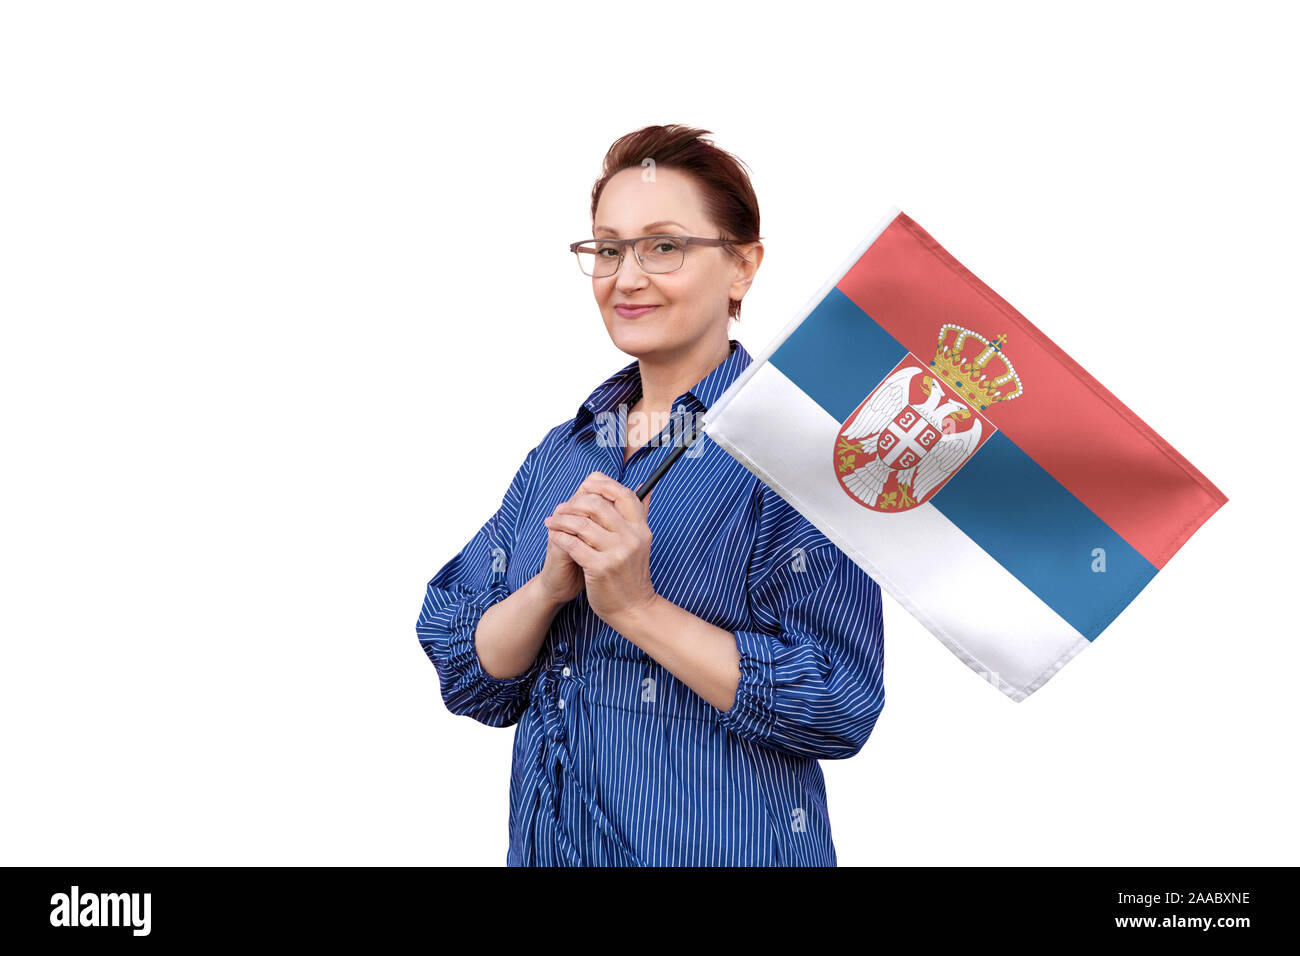 Serbia flag. Woman holding Serbian flag. Nice portrait of middle aged lady 40 50 years old holding a large flag isolated on white background. Stock Photo